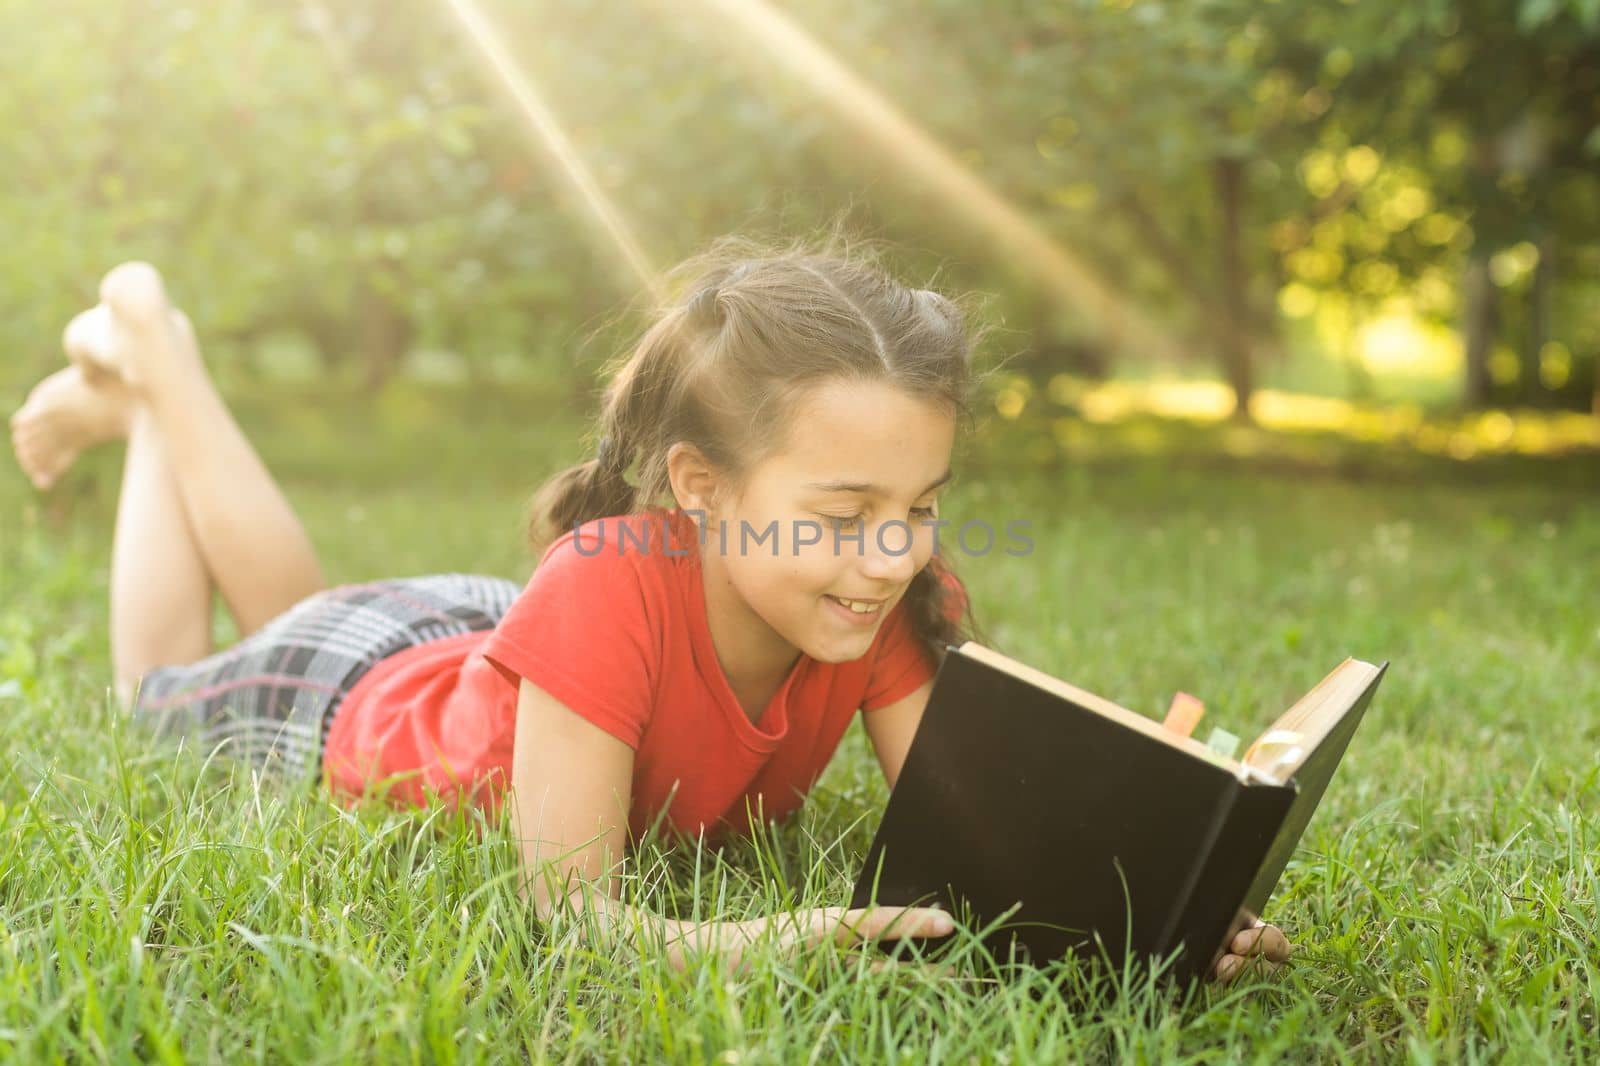 Little girl with a book in the garden. Kid is readding a book on hands. outdoors in summer day. Countryside.